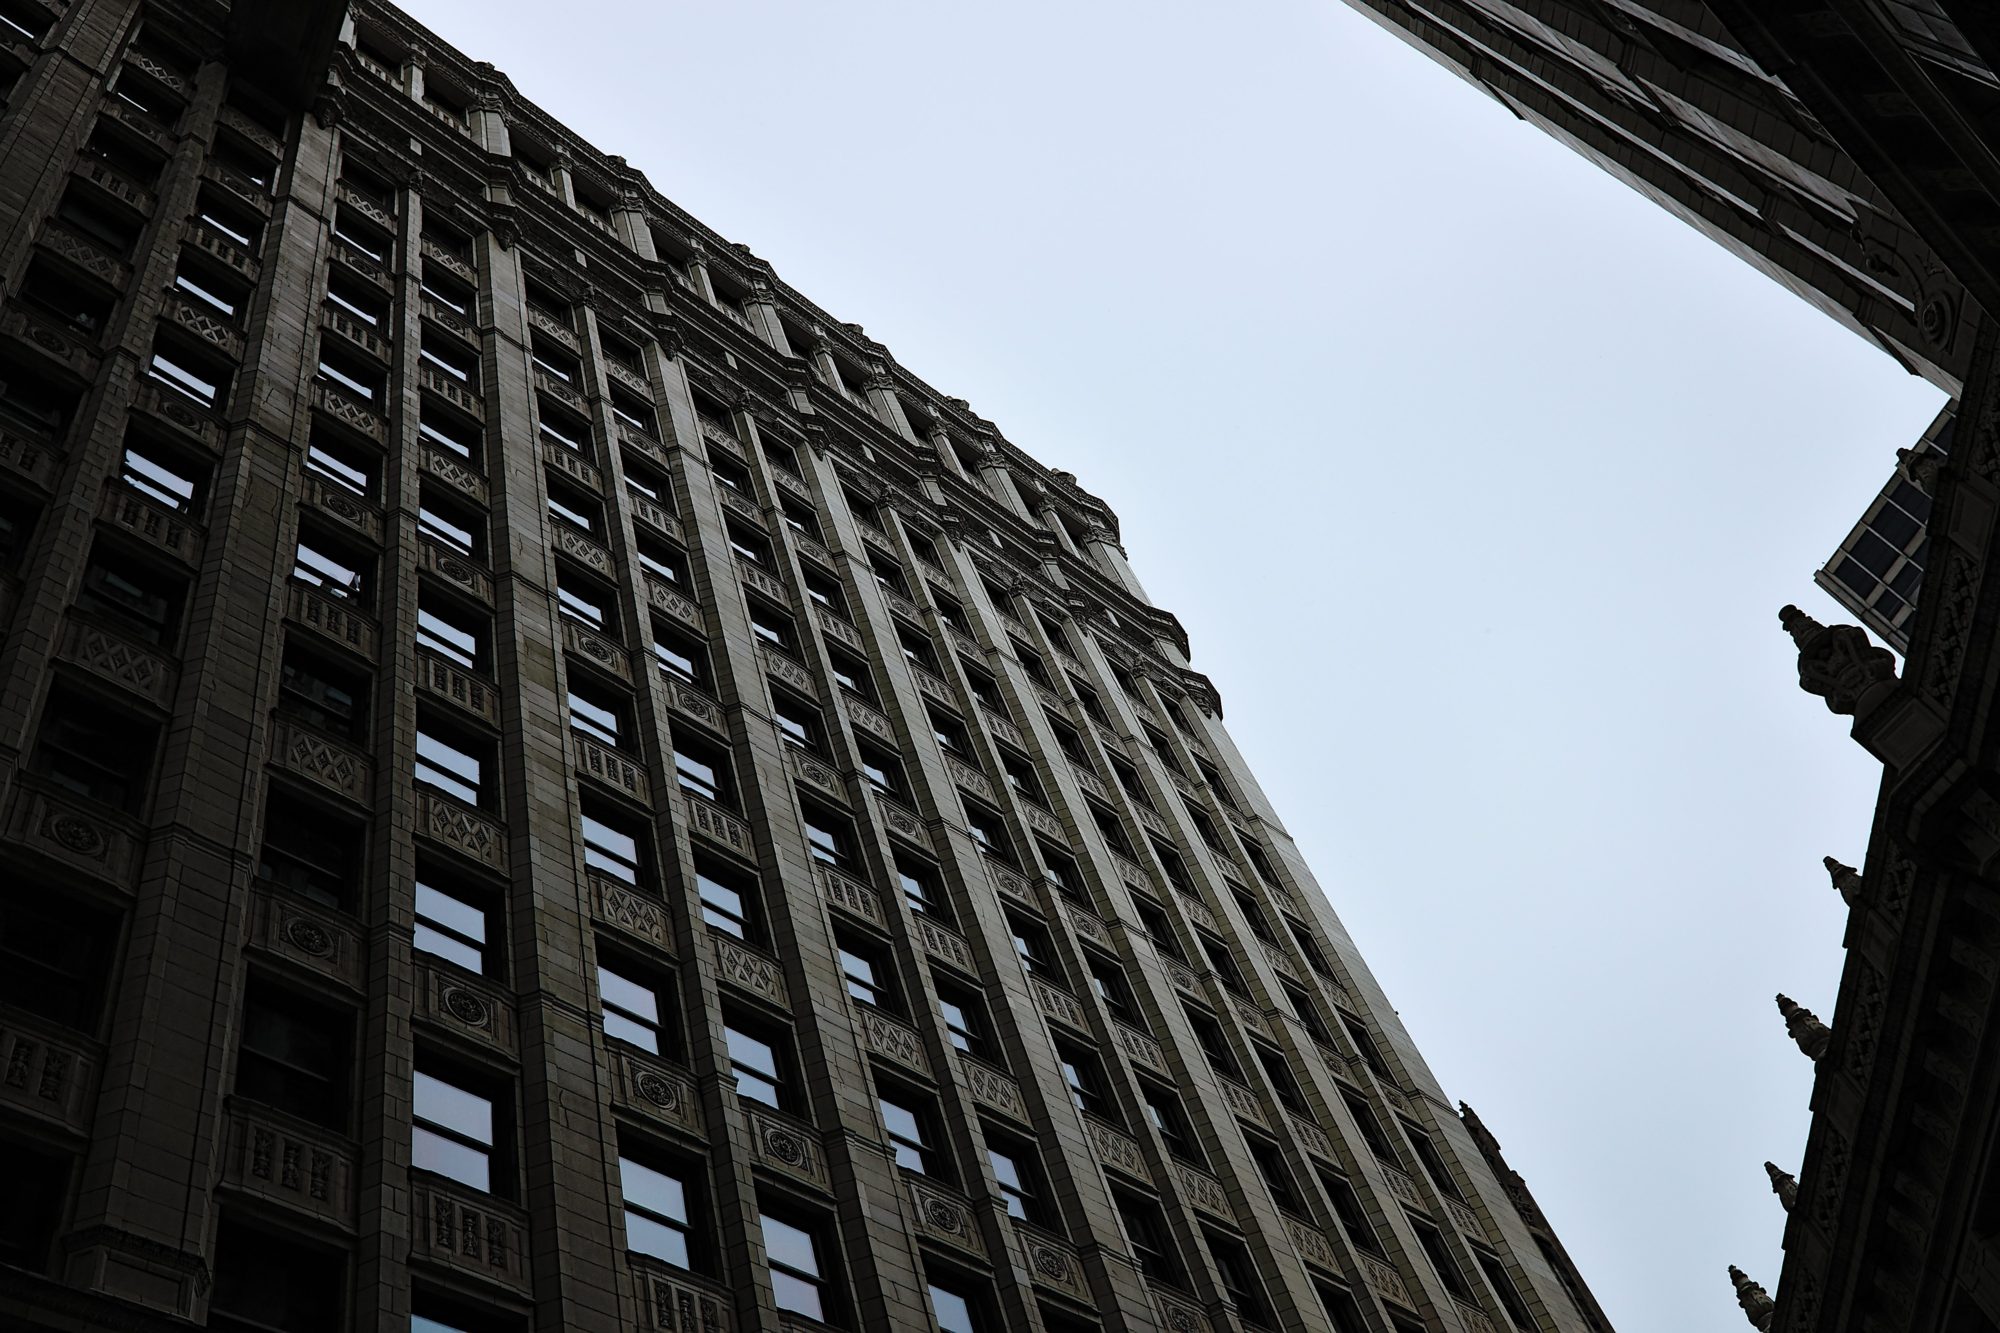 A view of a building in Chicago from the ground up